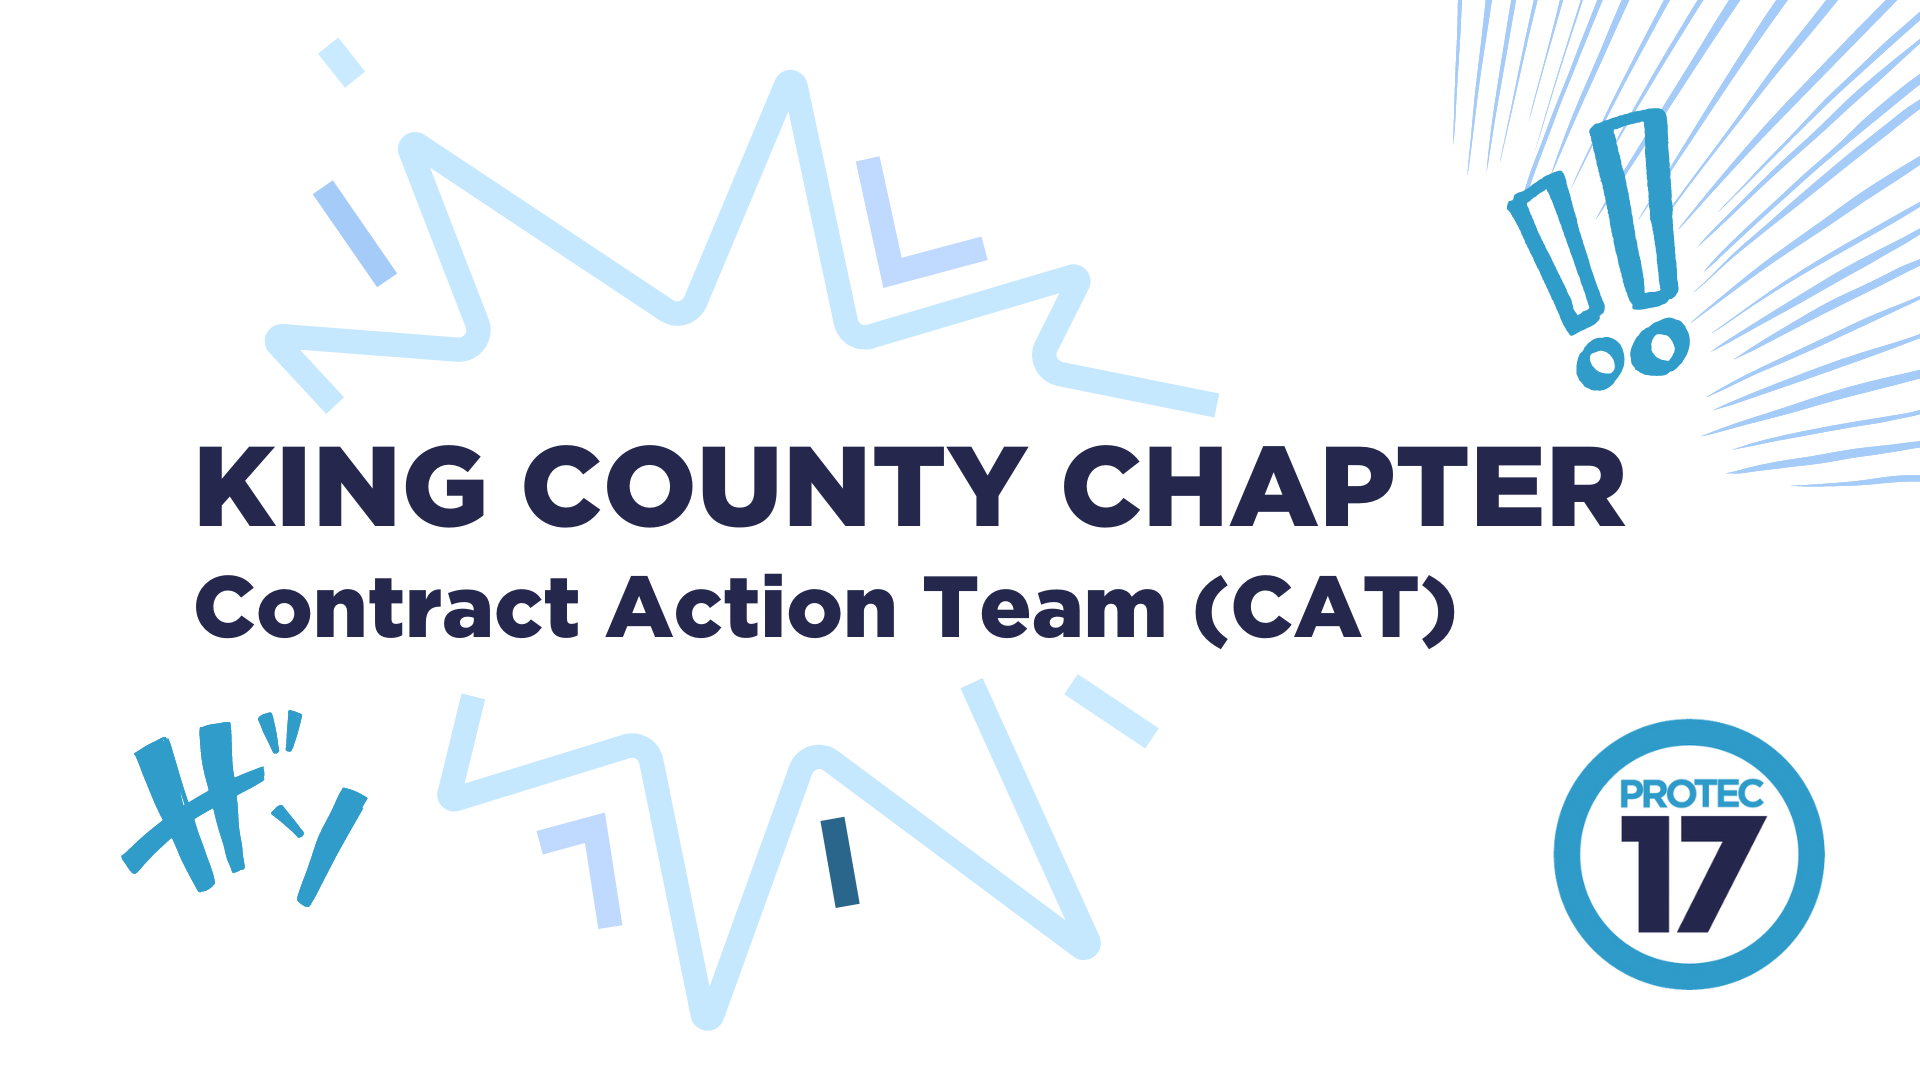 The text reads, "KING COUNTY CHAPTER | Contract Action Team (CAT)" surrounding by various cartoon-like superhero-inspired graphics. There is an explosion in the back, fighting symbols in the bottom right, and exclamation marks in the top right, all graphic novel style. The PROTEC17 logo is in the bottom right.